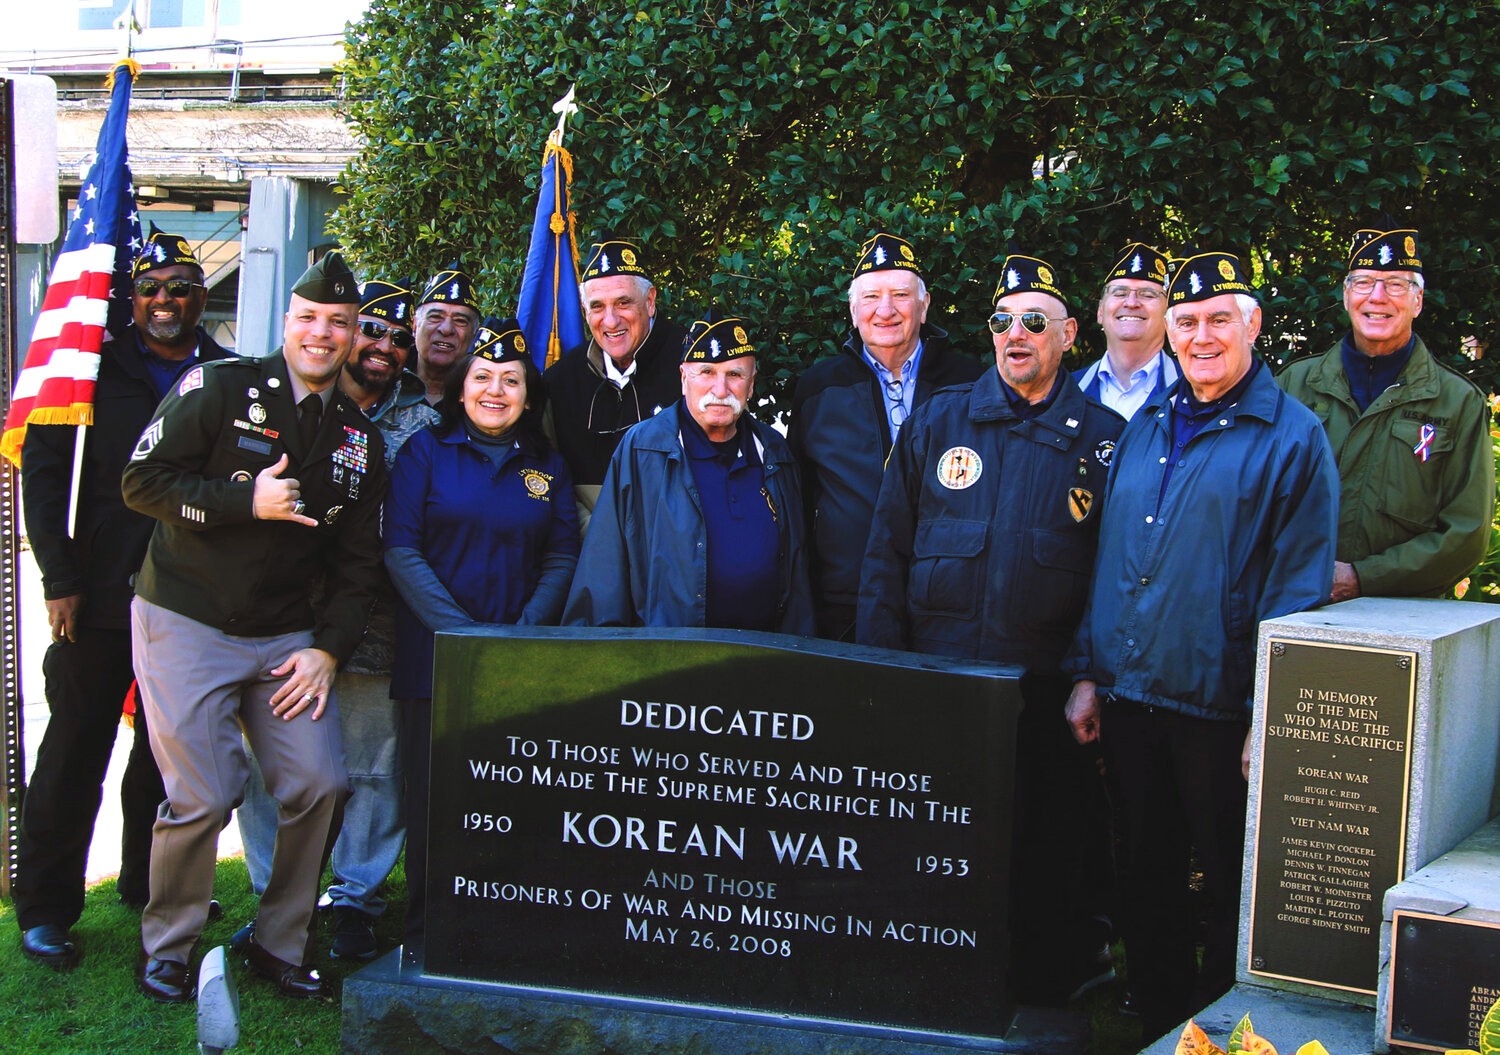 Members of the Lynbrook American Legion Post 335, and Sergeant First Class Jose Marrero, U.S. Army Recruiter of Lynbrook.